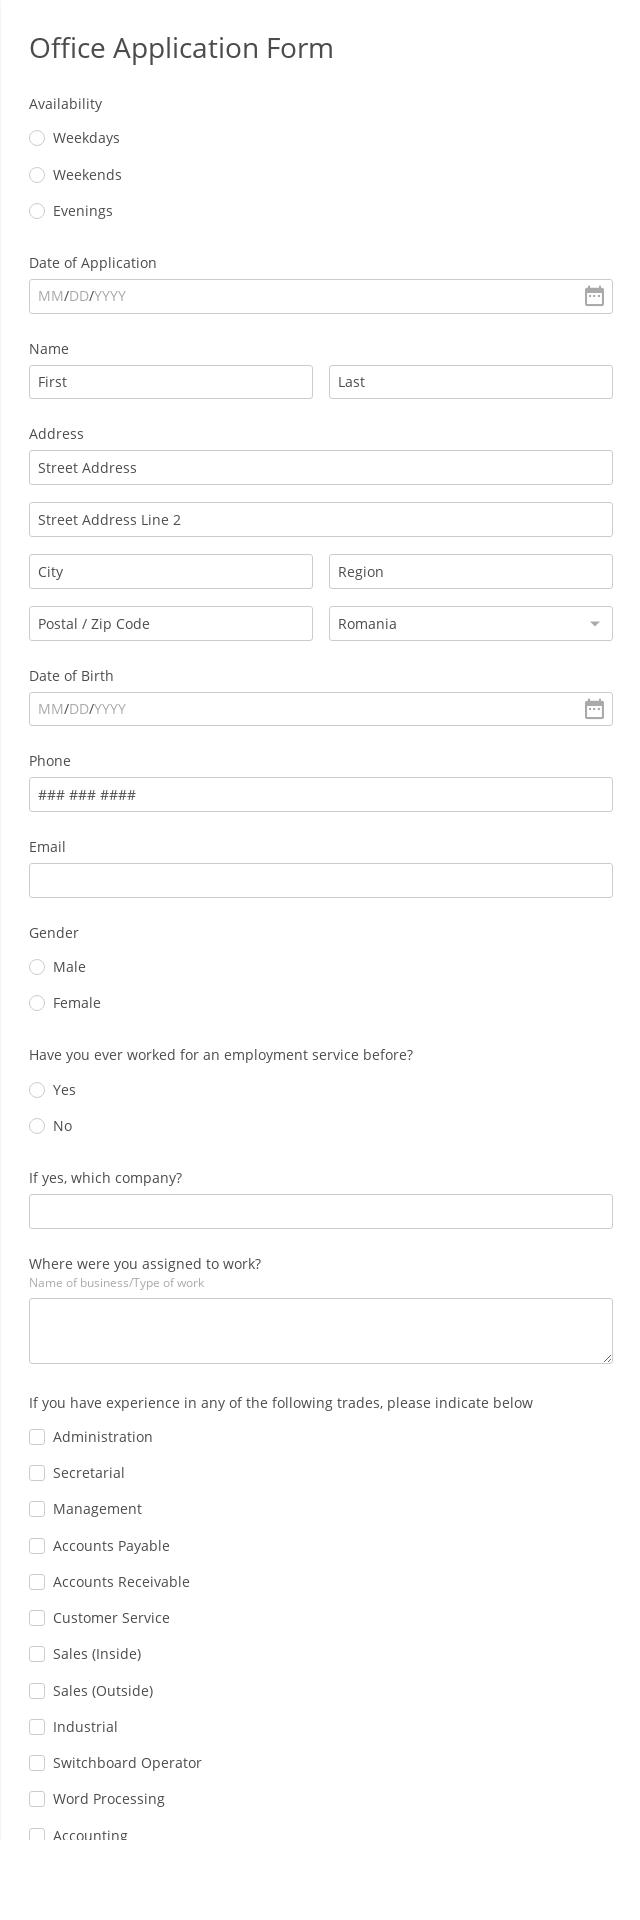 Office Application Form